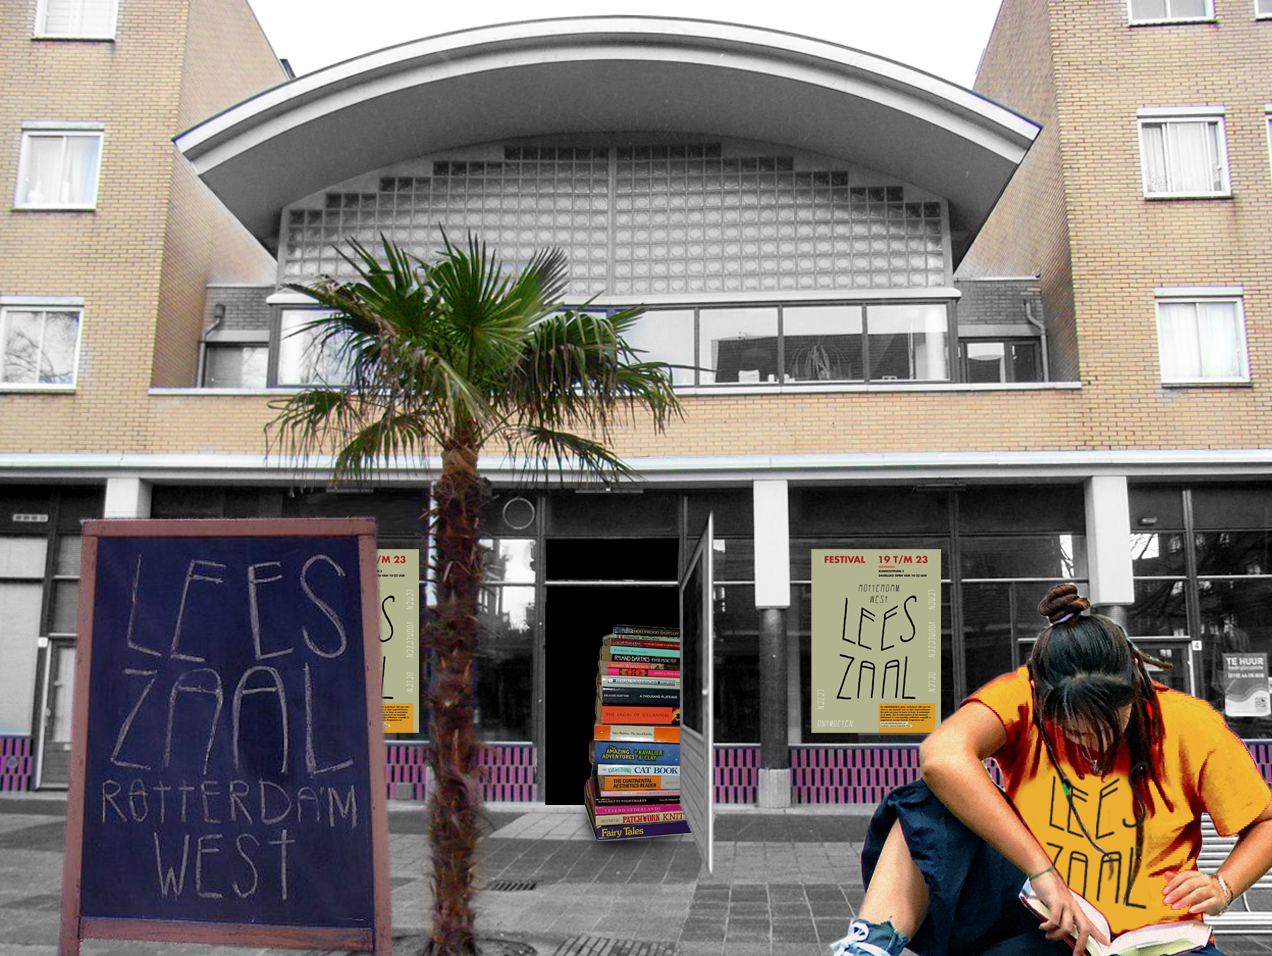 A mock-up of the building we will be using for our Reading Room Festival (made by Karin ter Laak)